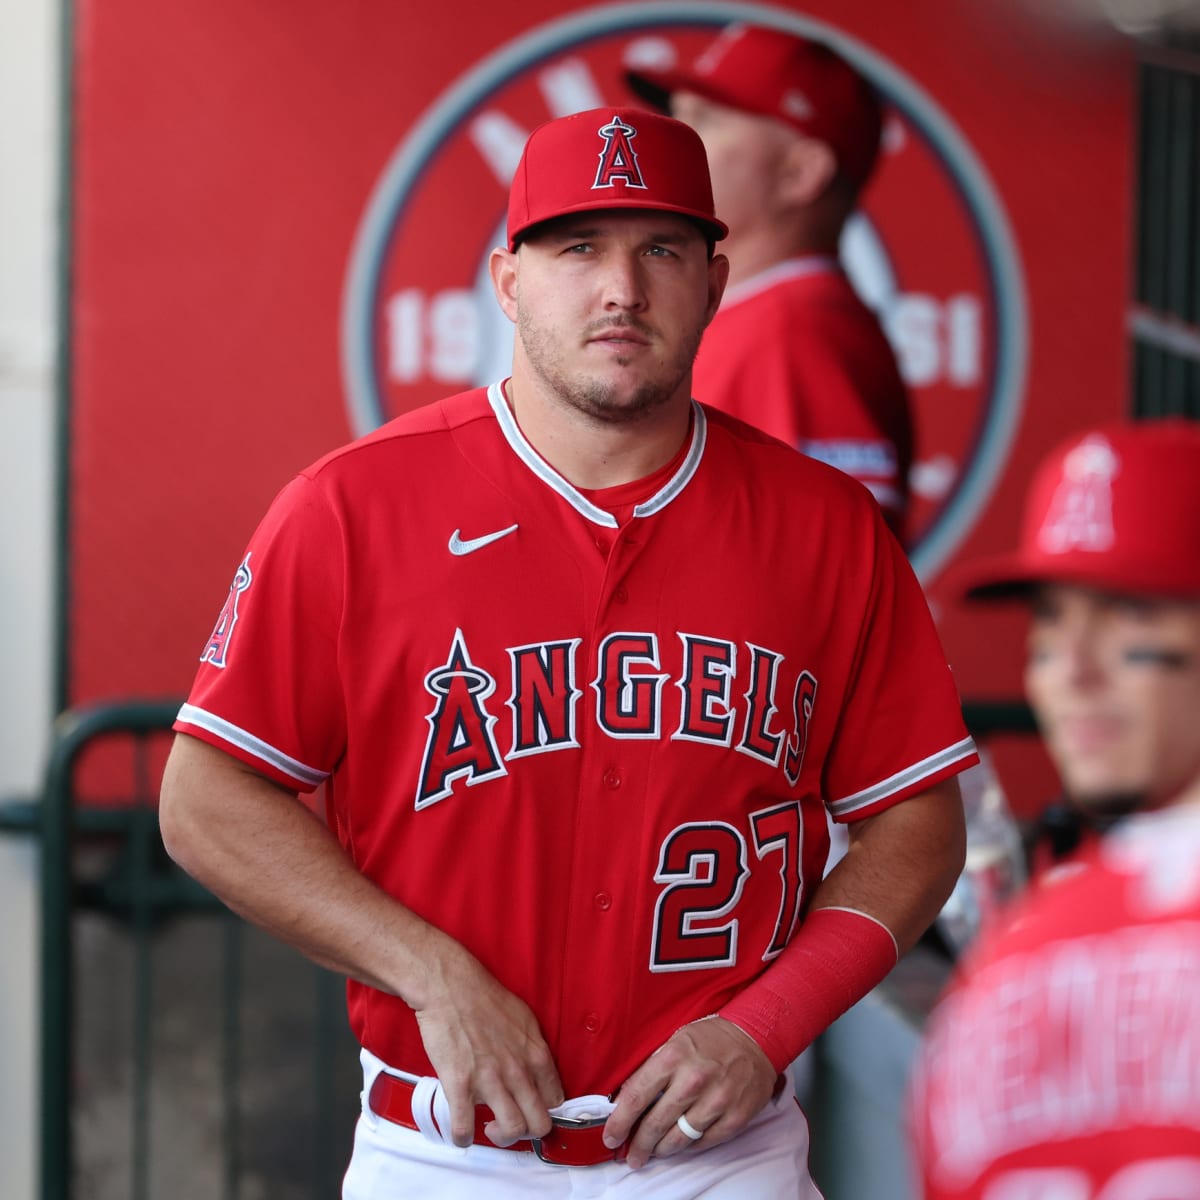 Looks Like No Dodger Blue For Mike Trout